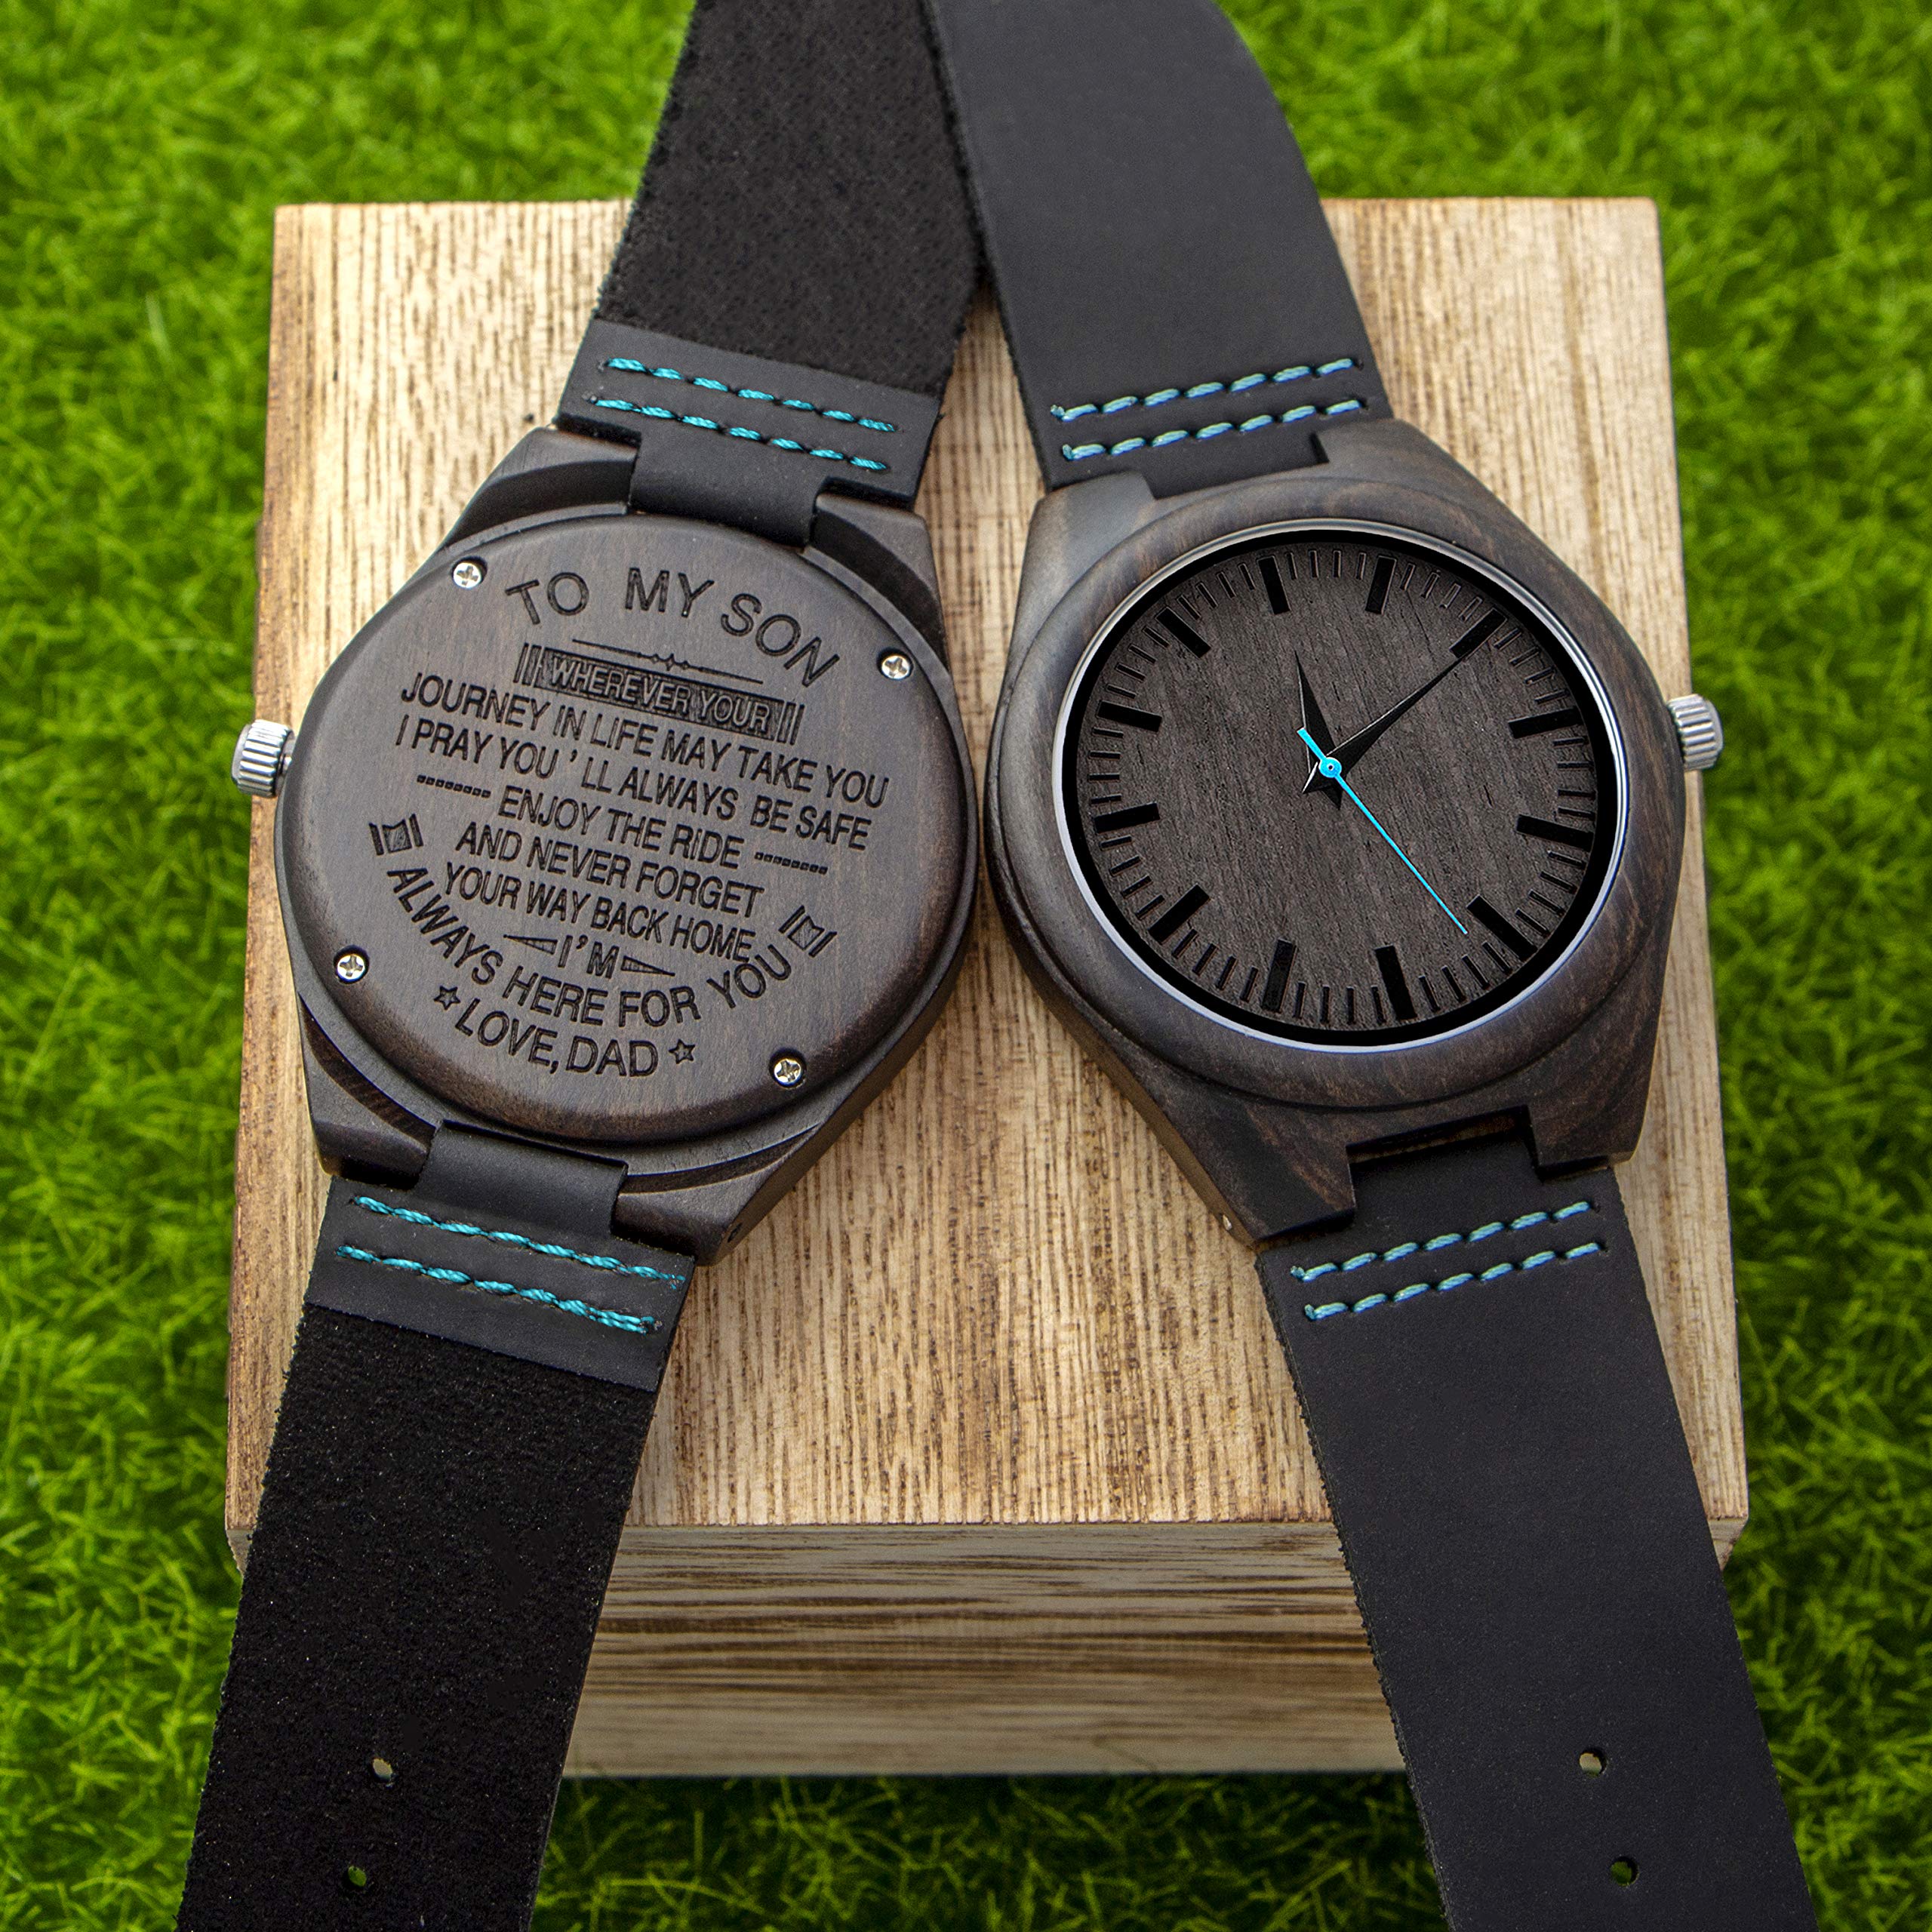 KWOOD Engraved Wooden Watch for Son - Personalized Wood Watch Gift for Son Graduation Gift from Mom, from Dad